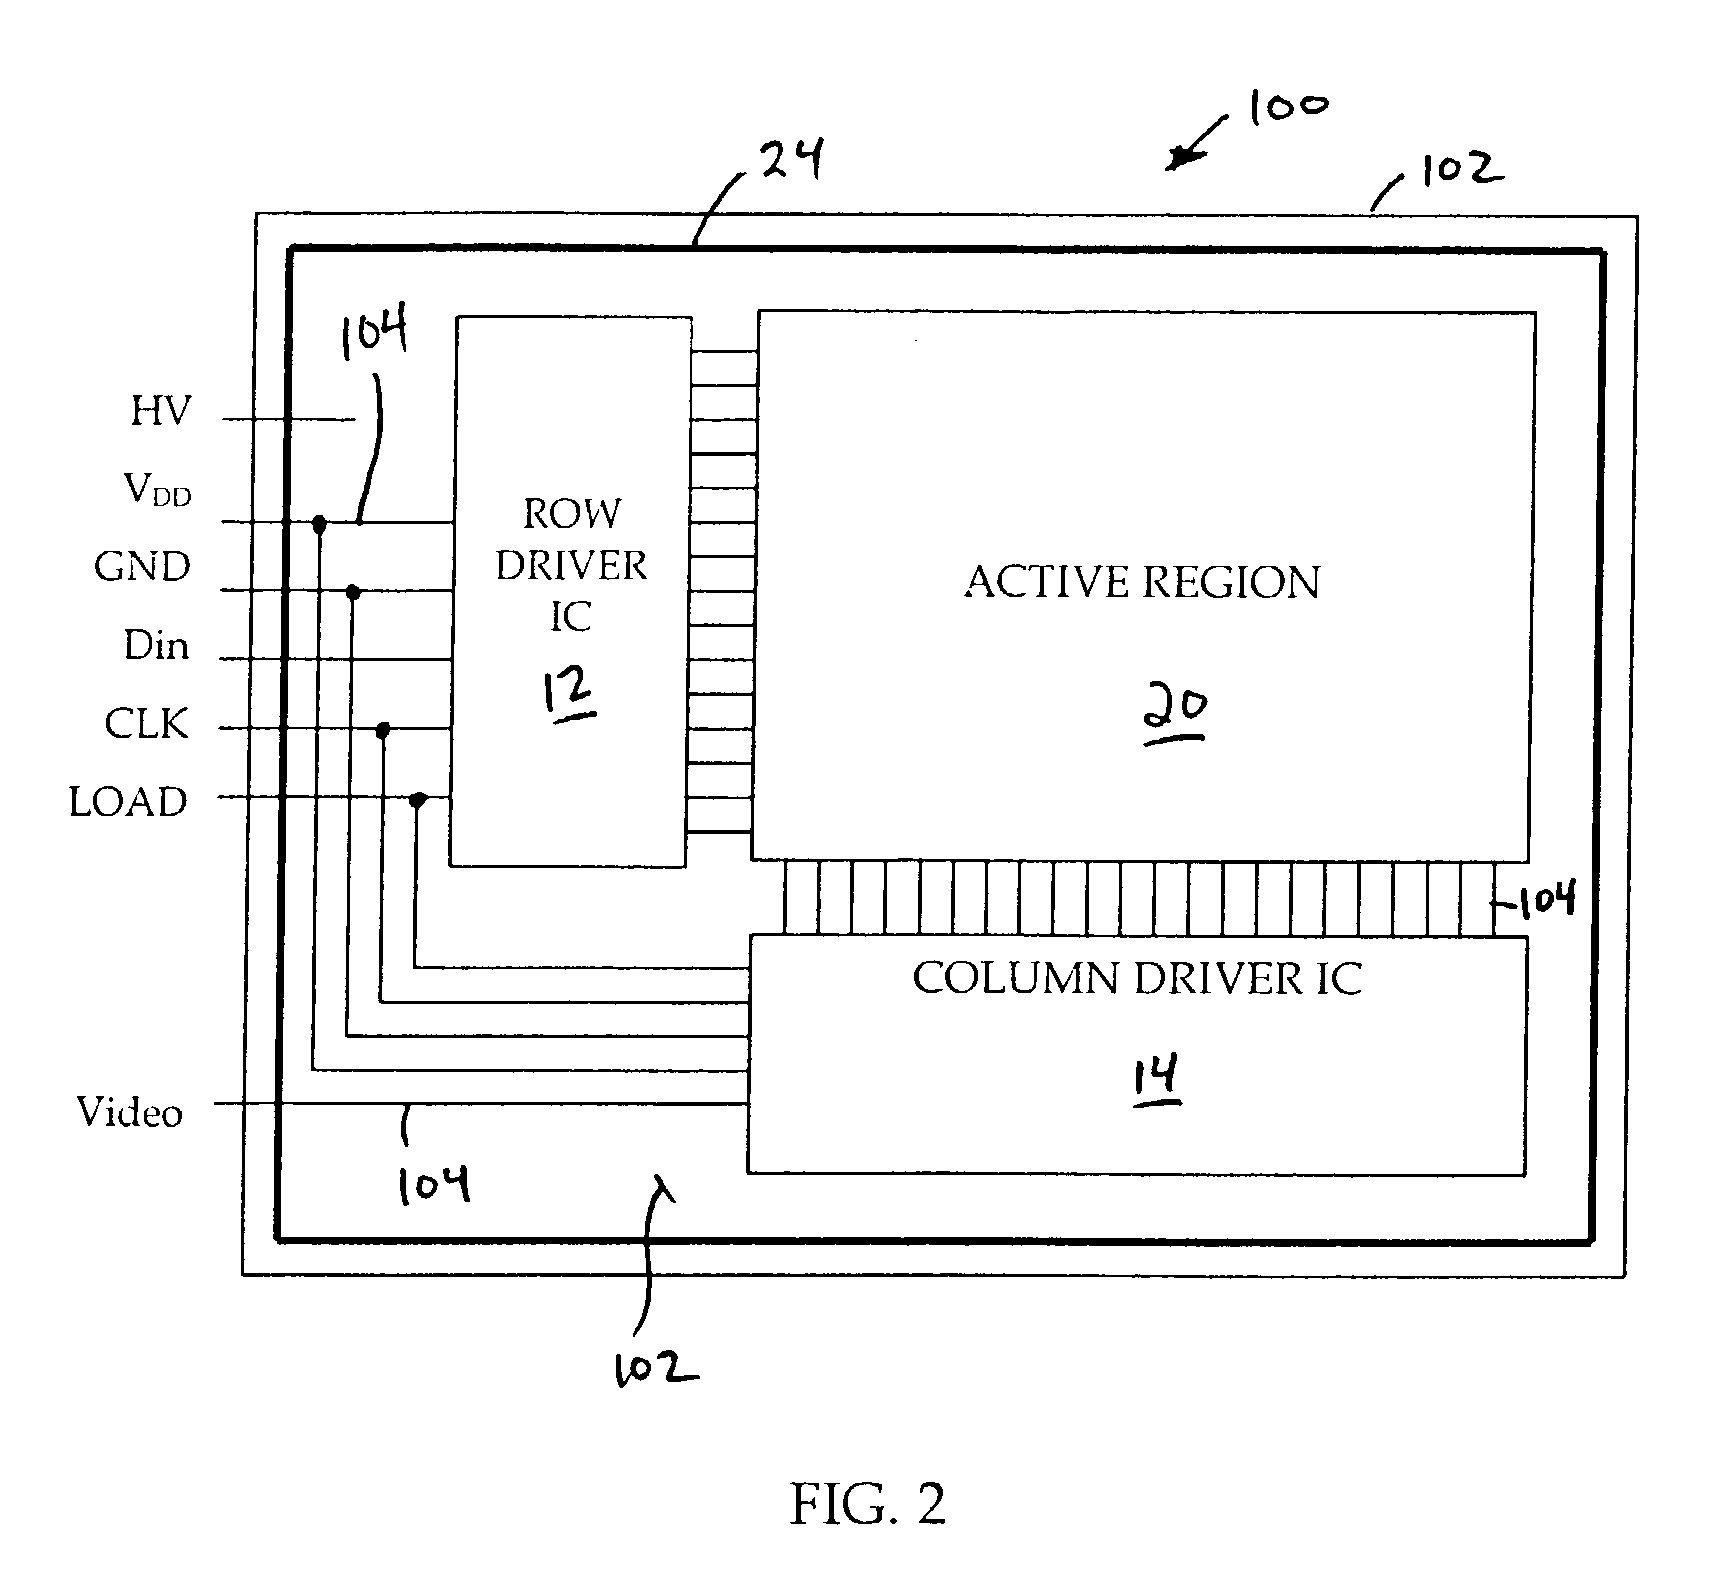 Image display device incorporating driver circuits on active substrate and other methods to reduce interconnects